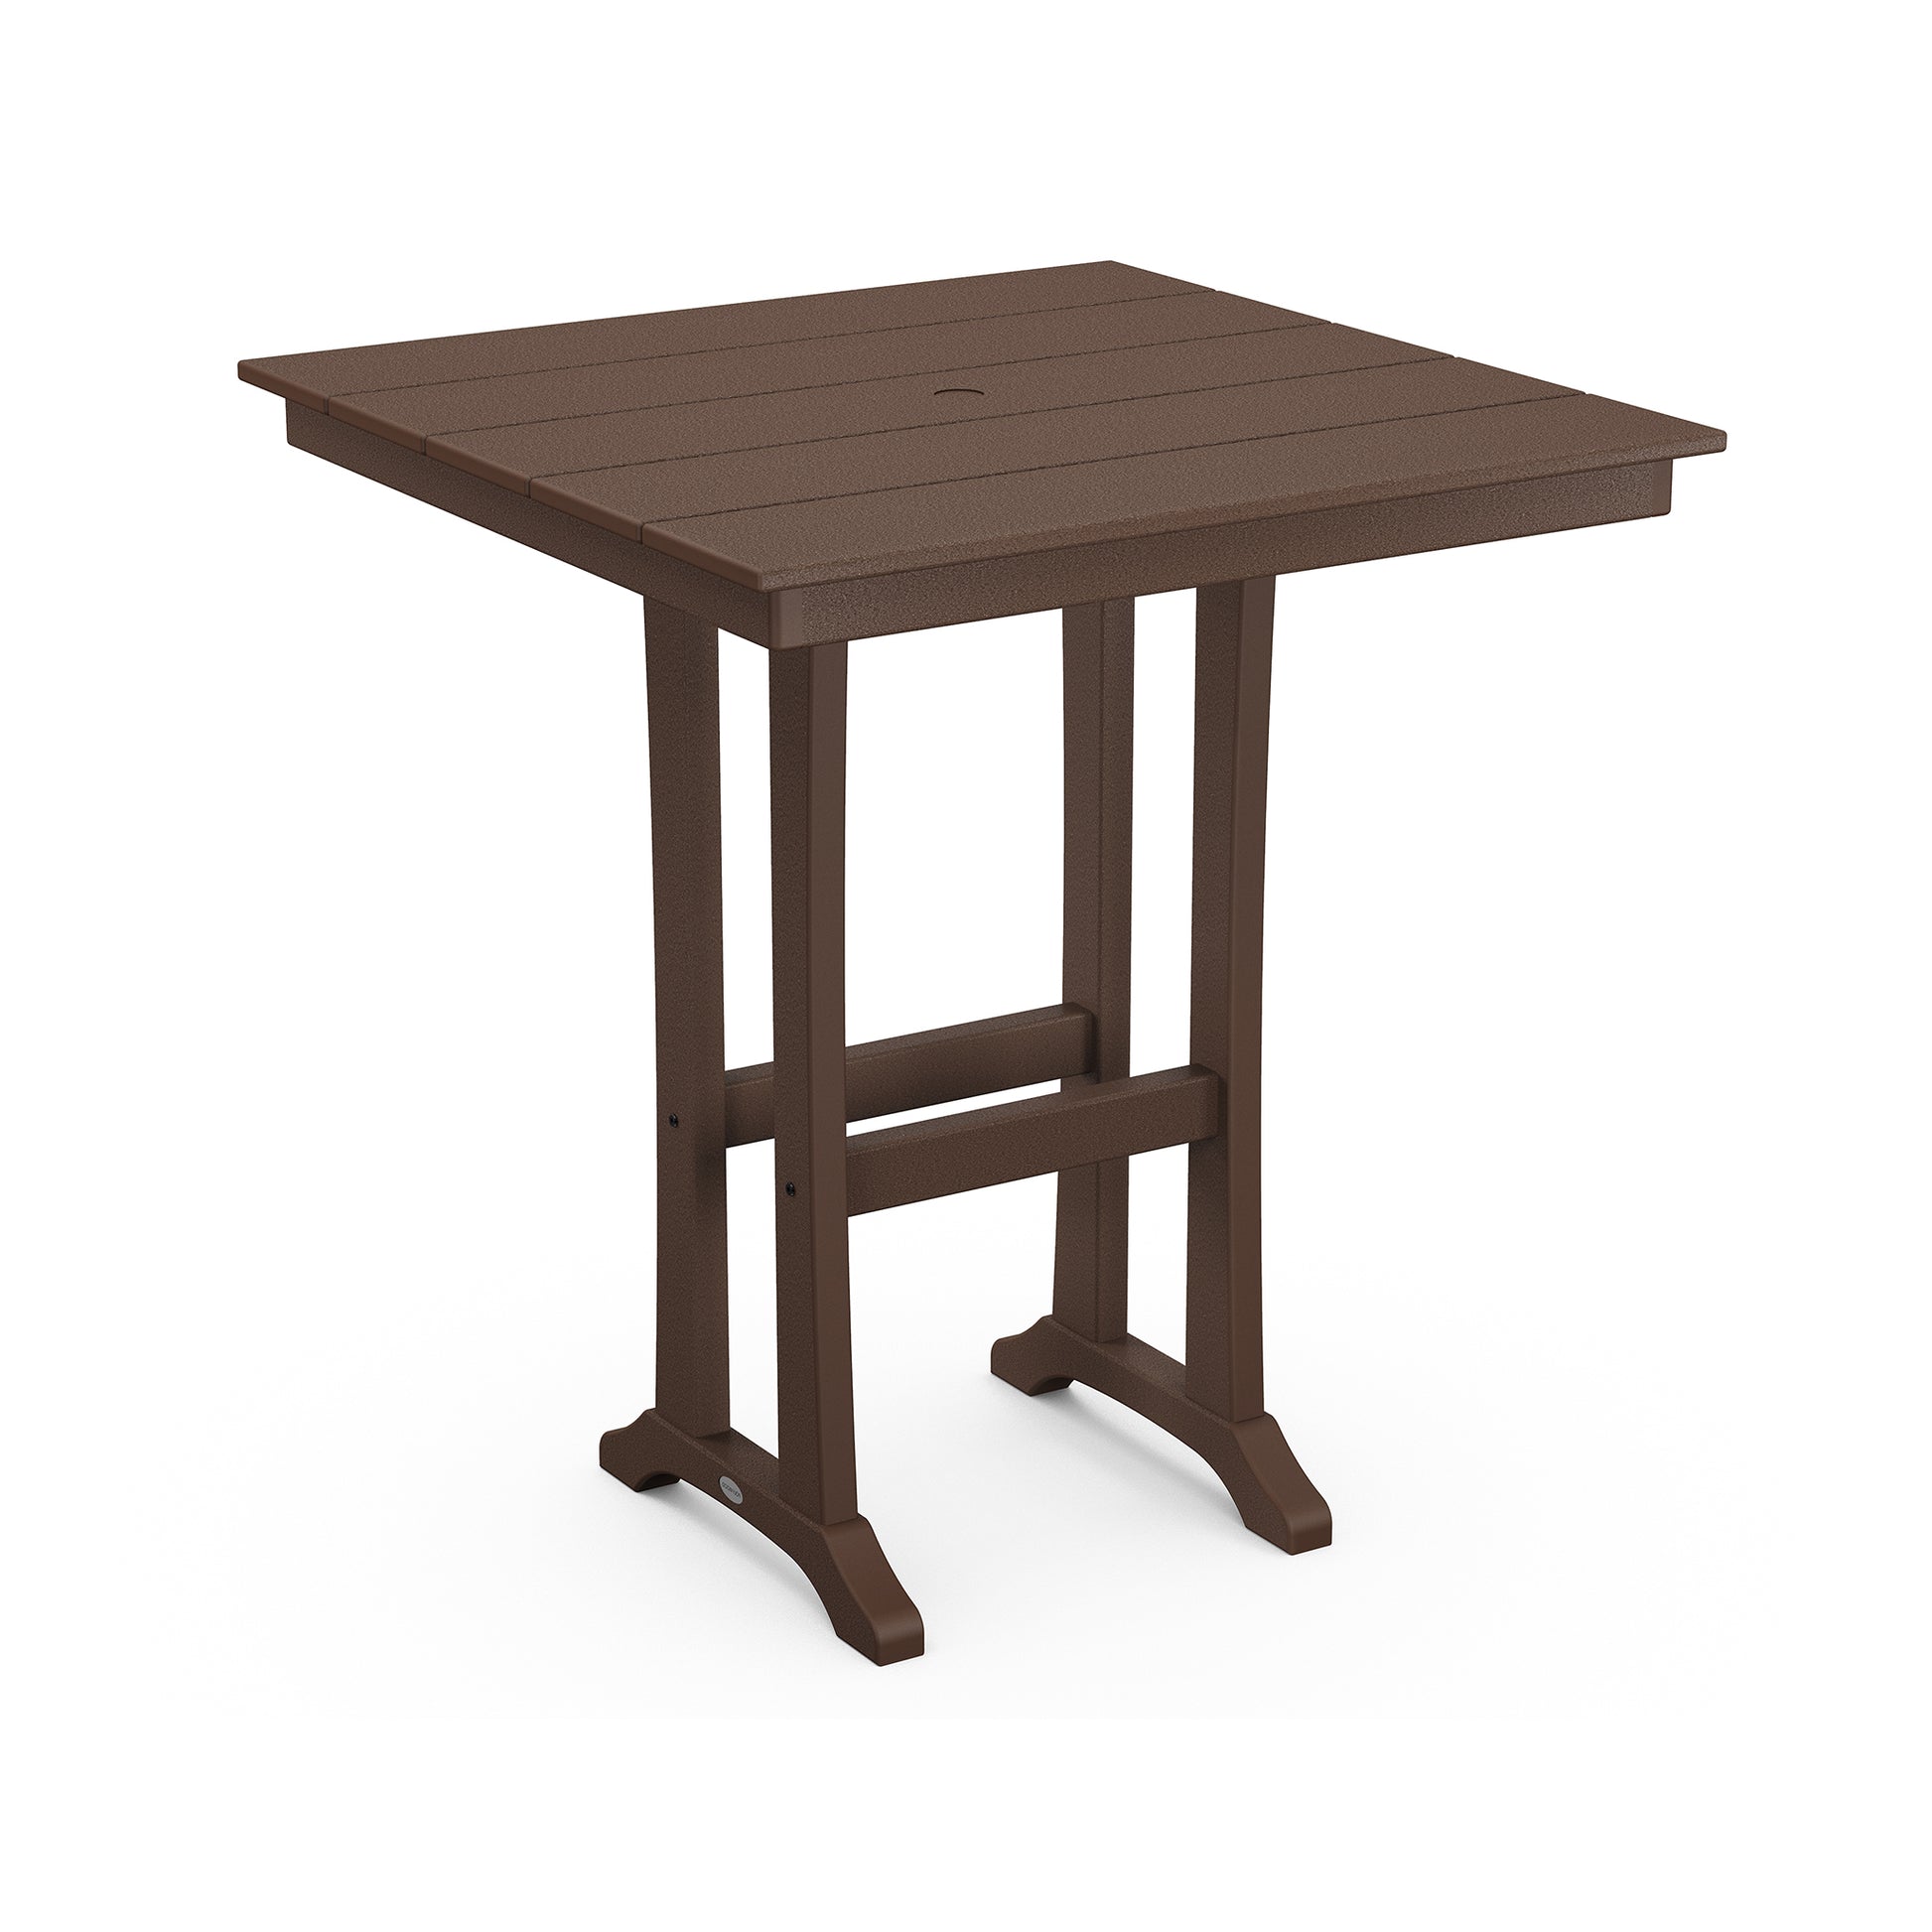 A 3d rendering of a simple square brown "POLYWOOD Farmhouse Trestle 37" Bar Table" with four legs and a slatted top, set against a white background.